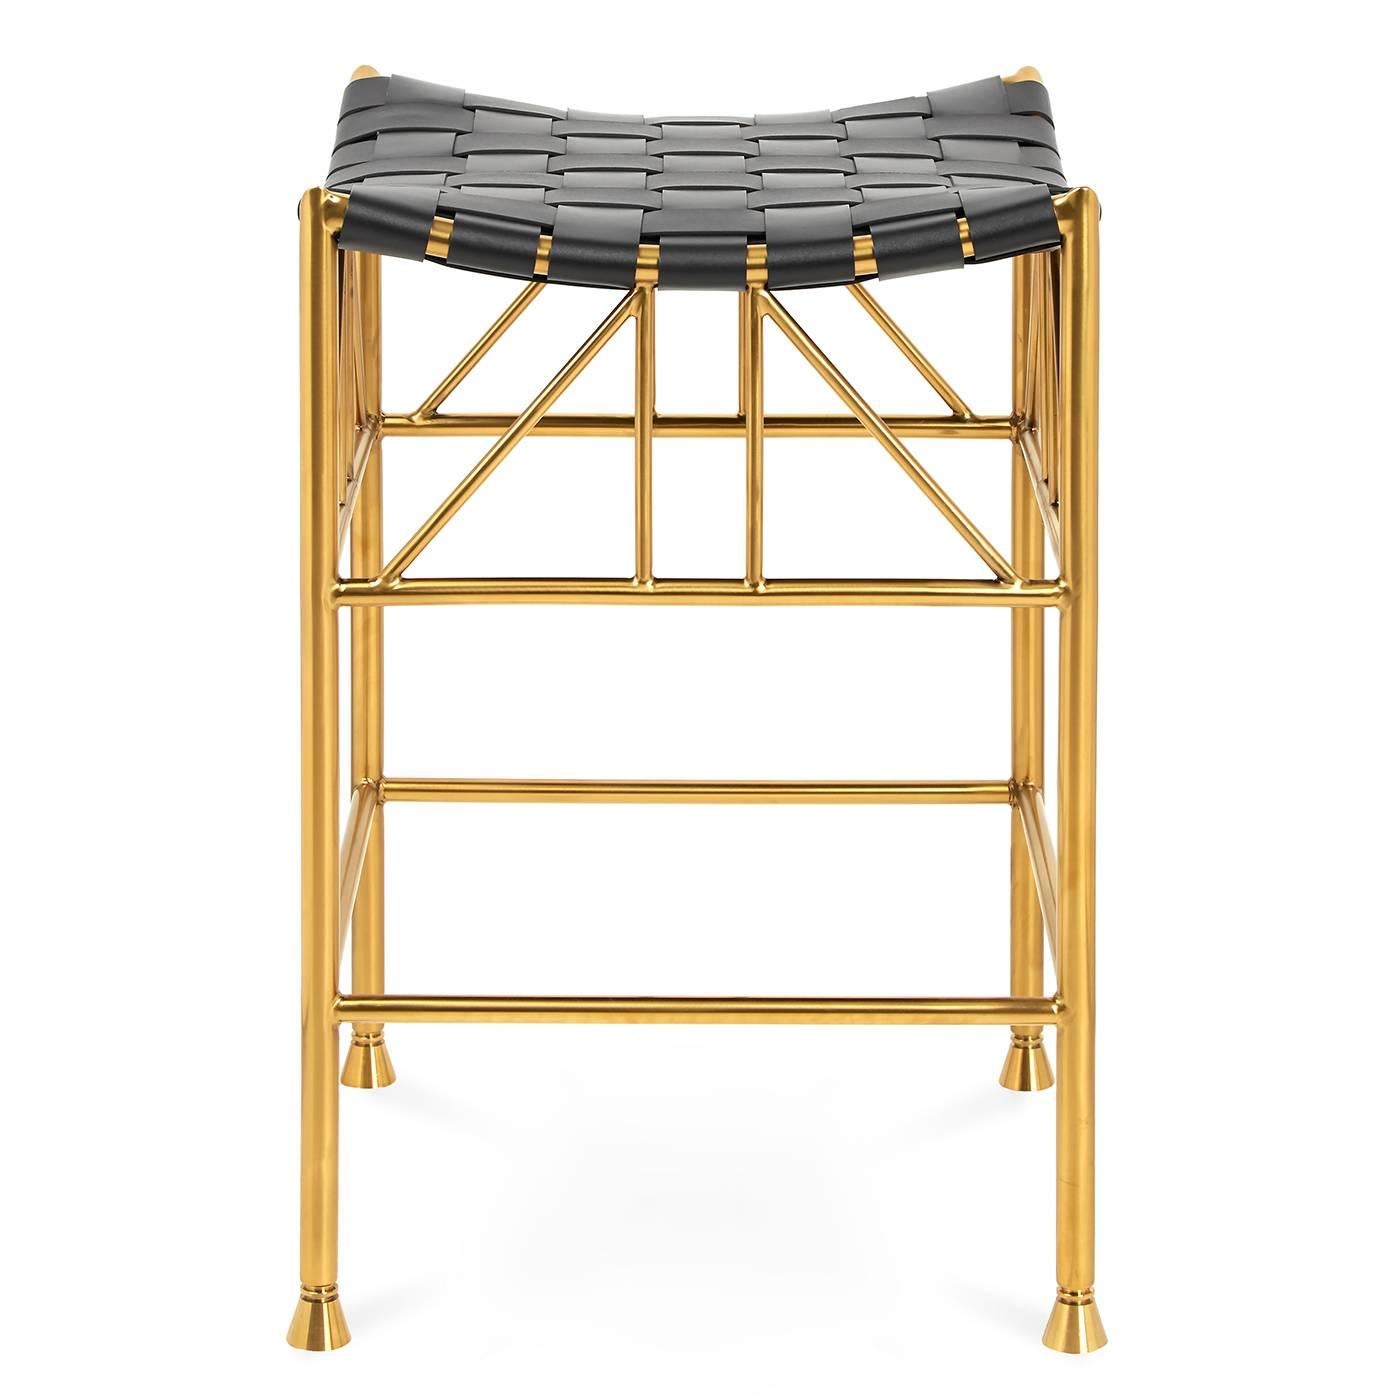 Royal seat. Thebes stools date back to the reign of the pharaohs and were revived by Liberty of London in the 19th century (when they rocketed to decorator staple status). Our modern interpretation features a brass framework and a spacious seat